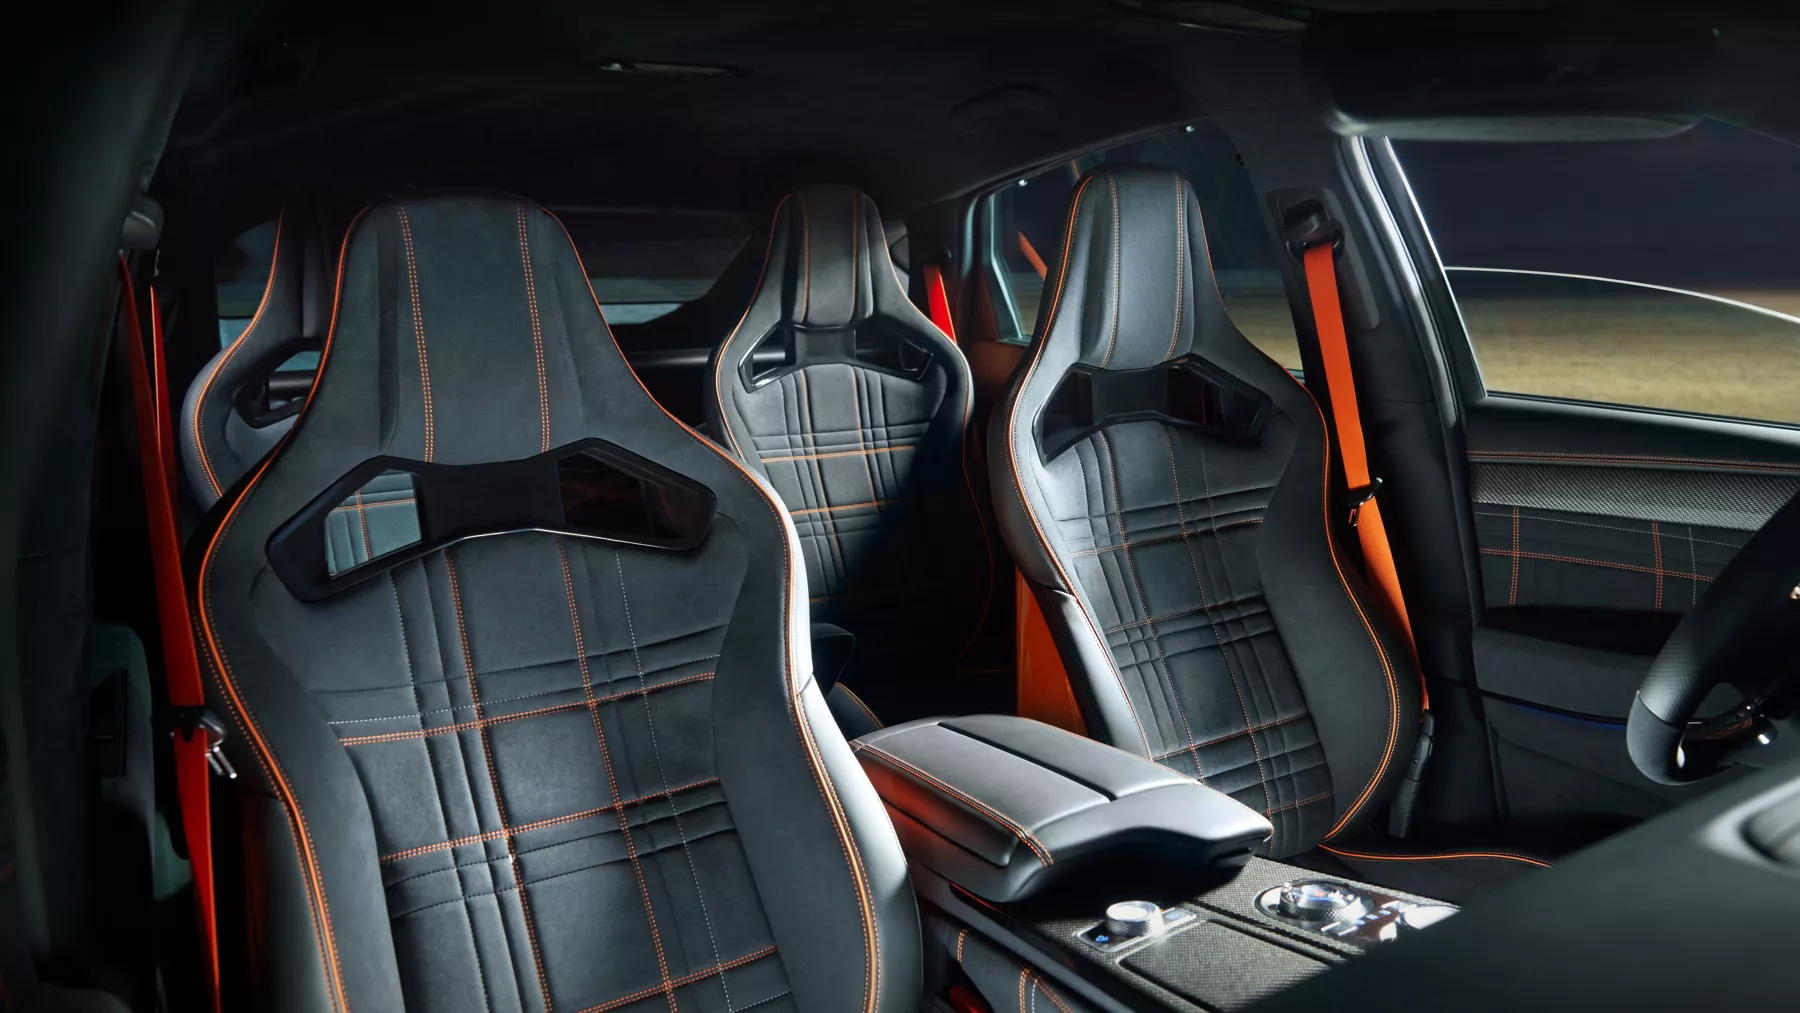 GV80 Coupe Concept interior shot highlighting the seat stitching.